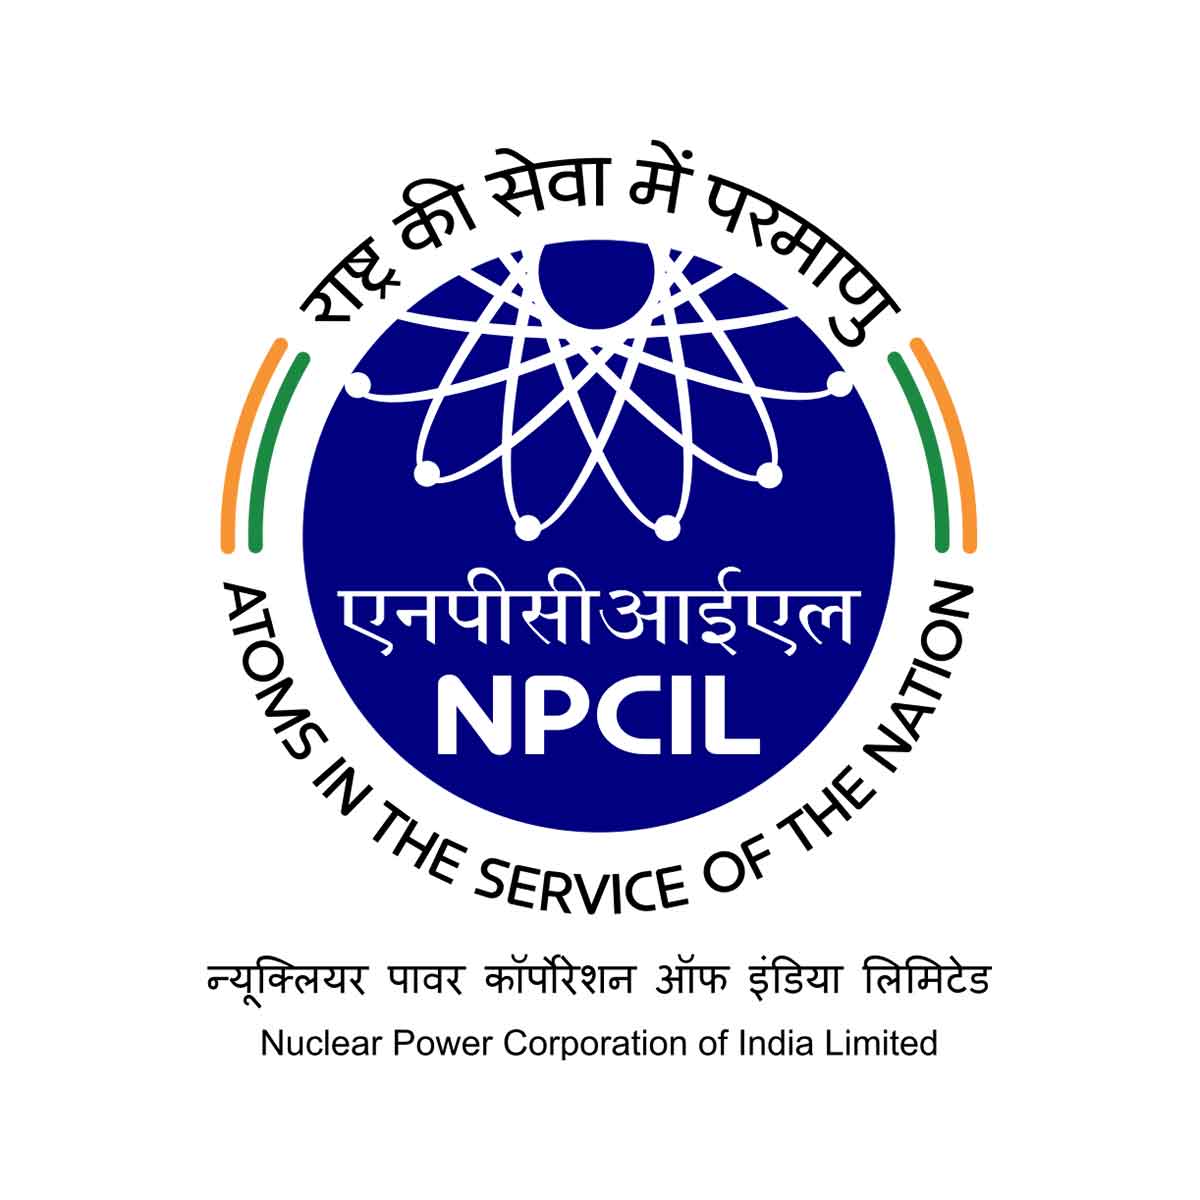 Npcil Machinist Recruitment - The Nuclear Power Corporation Of India Limited Job Vacancies